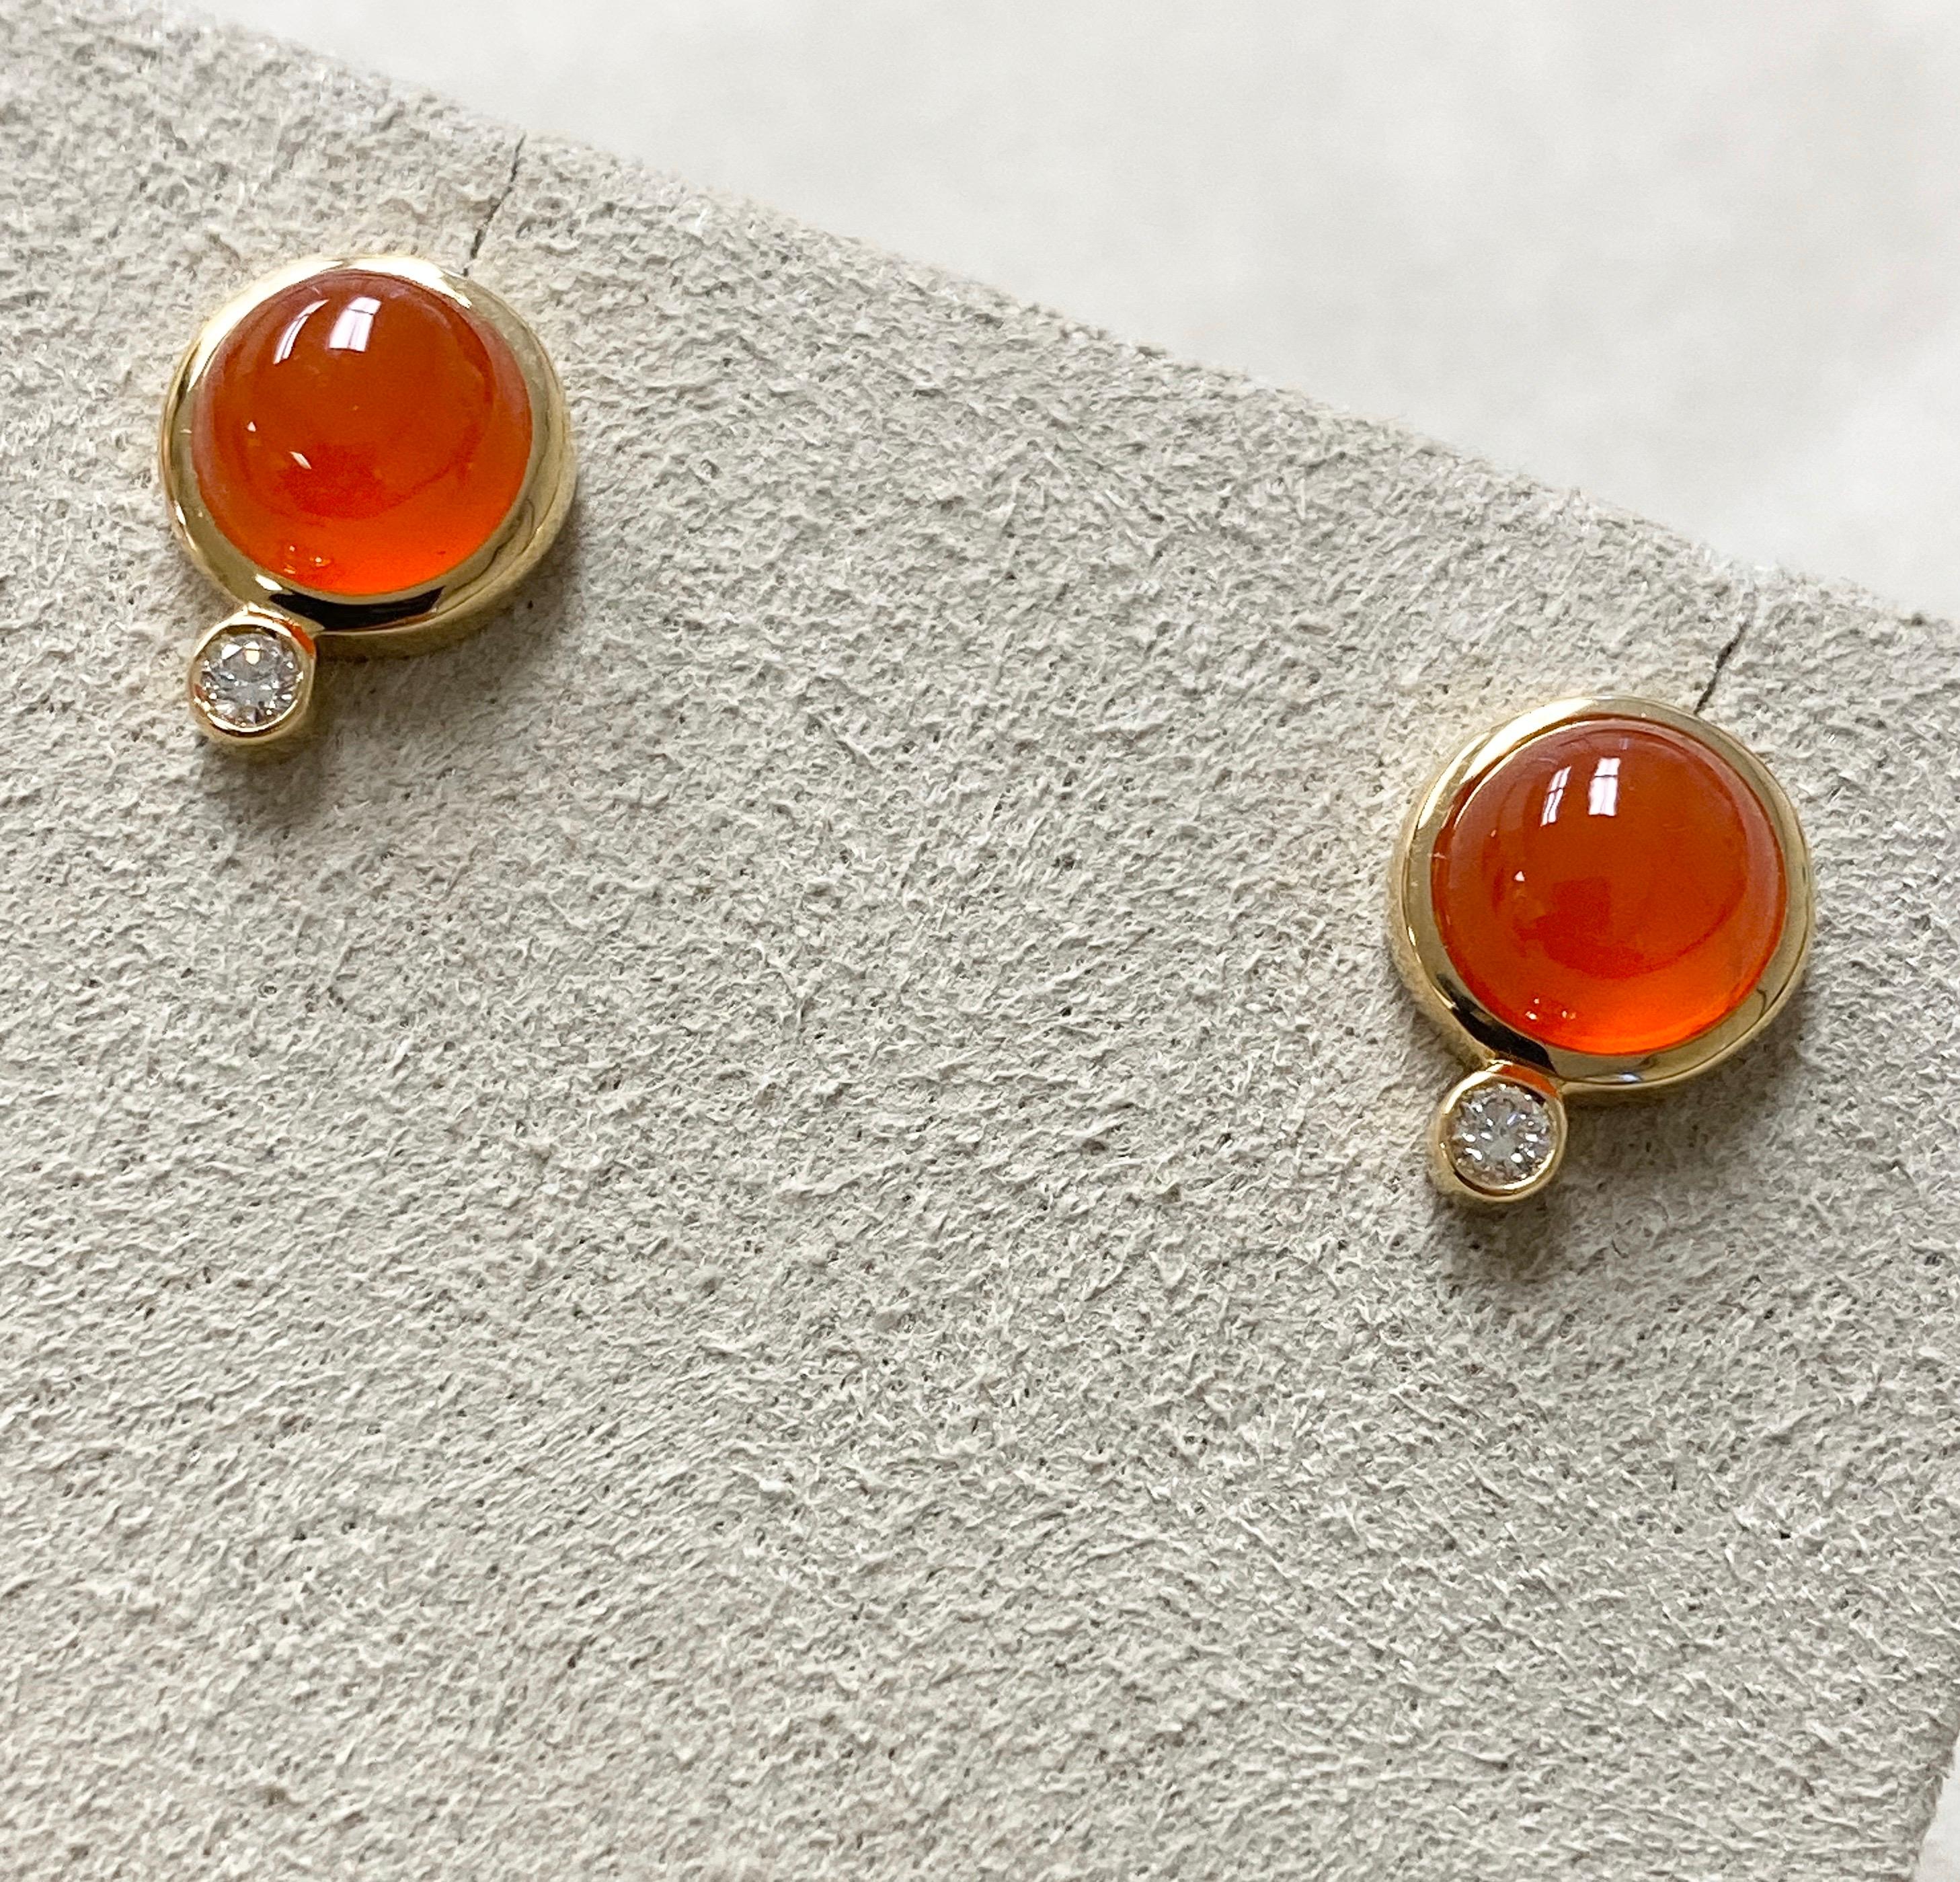 Created in 18 karat yellow gold
Orange Chalcedony 4 cts approx
Diamonds 0.10 ct approx
Can be worn at different angles
Limited edition

Crafted in 18 karat yellow gold, these limited edition Earrings feature Orange Chalcedony and Diamonds for an